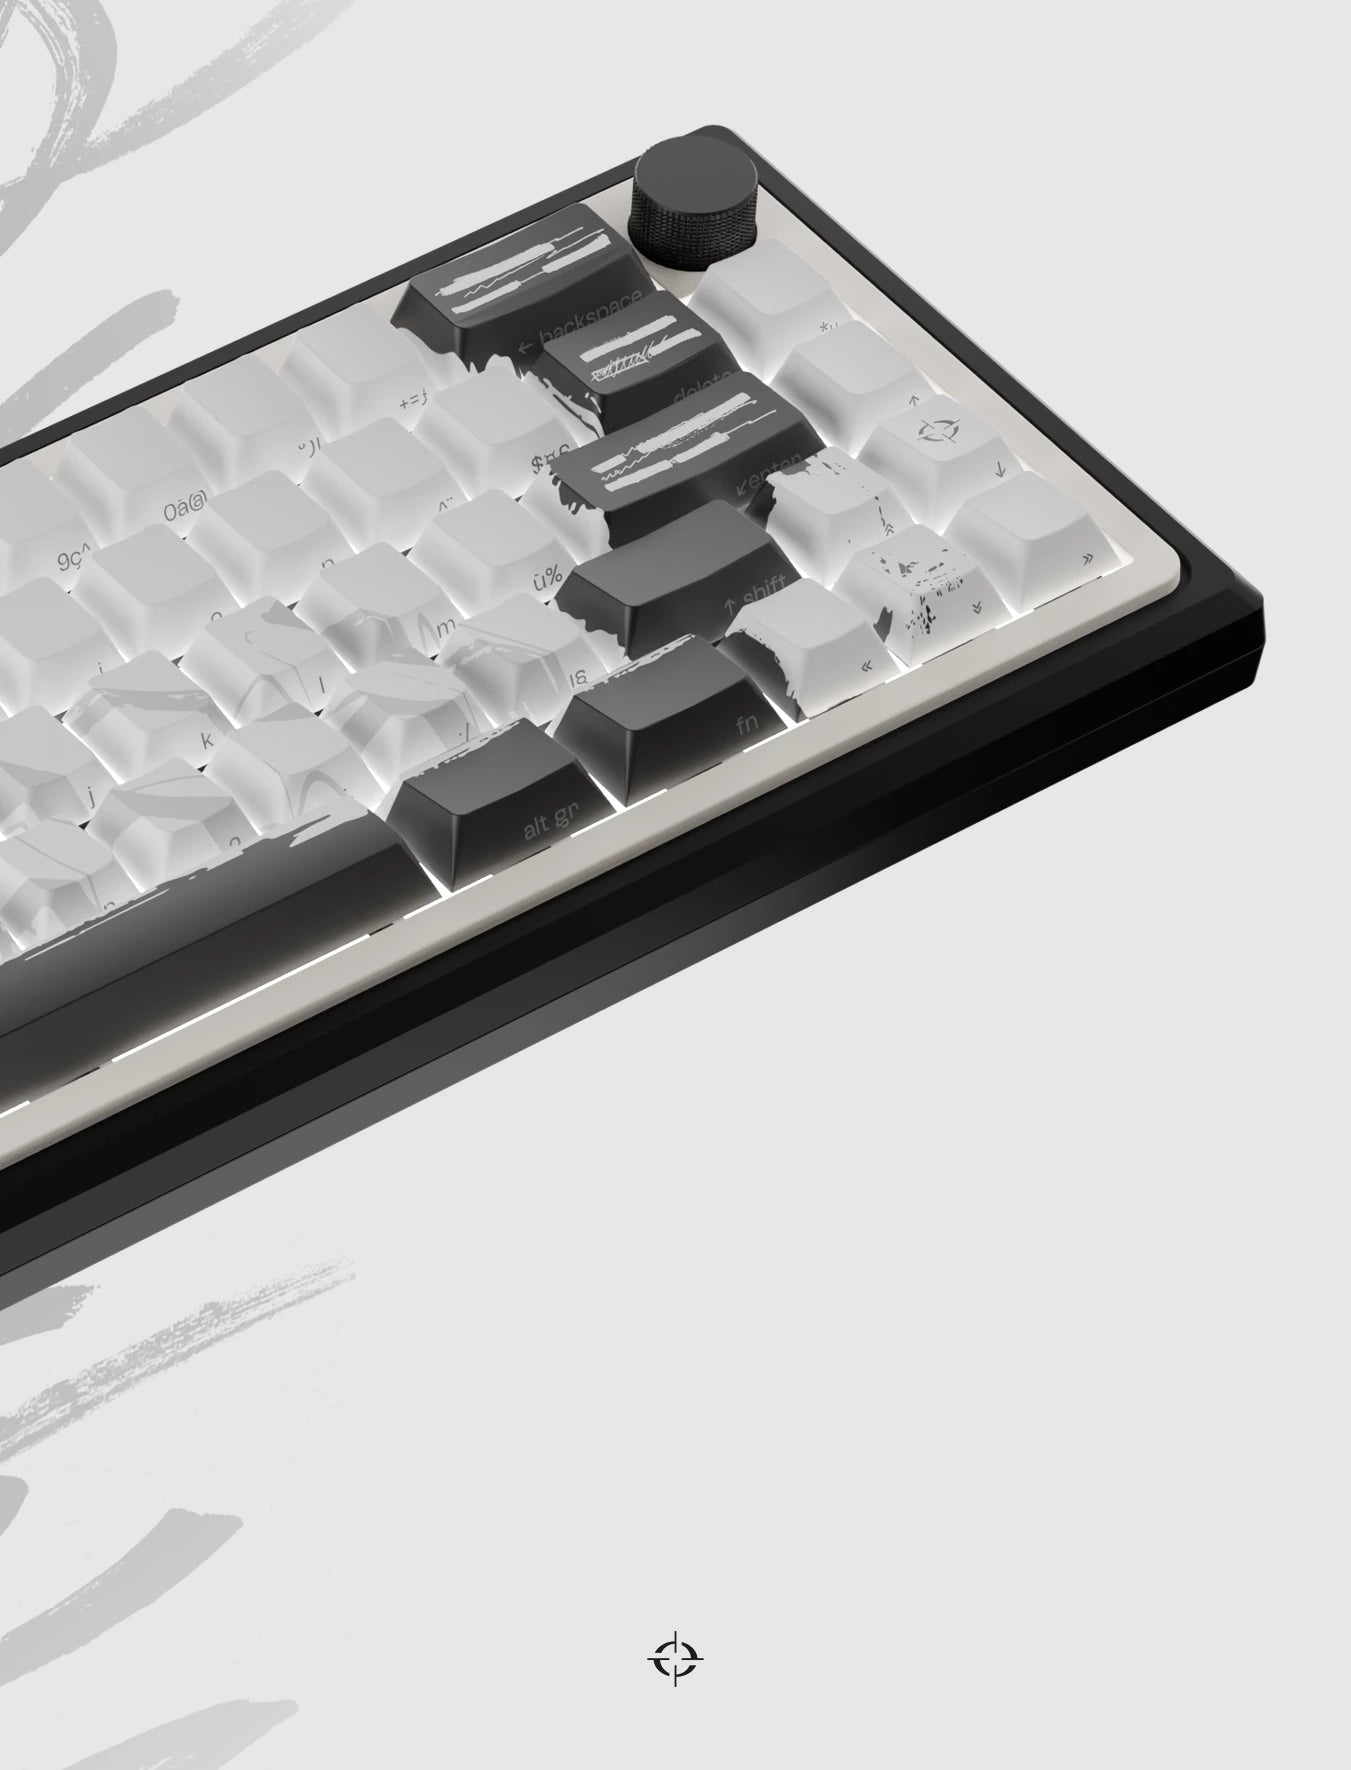 Tryhard - Le clavier mécanique gasquet ultra-compact